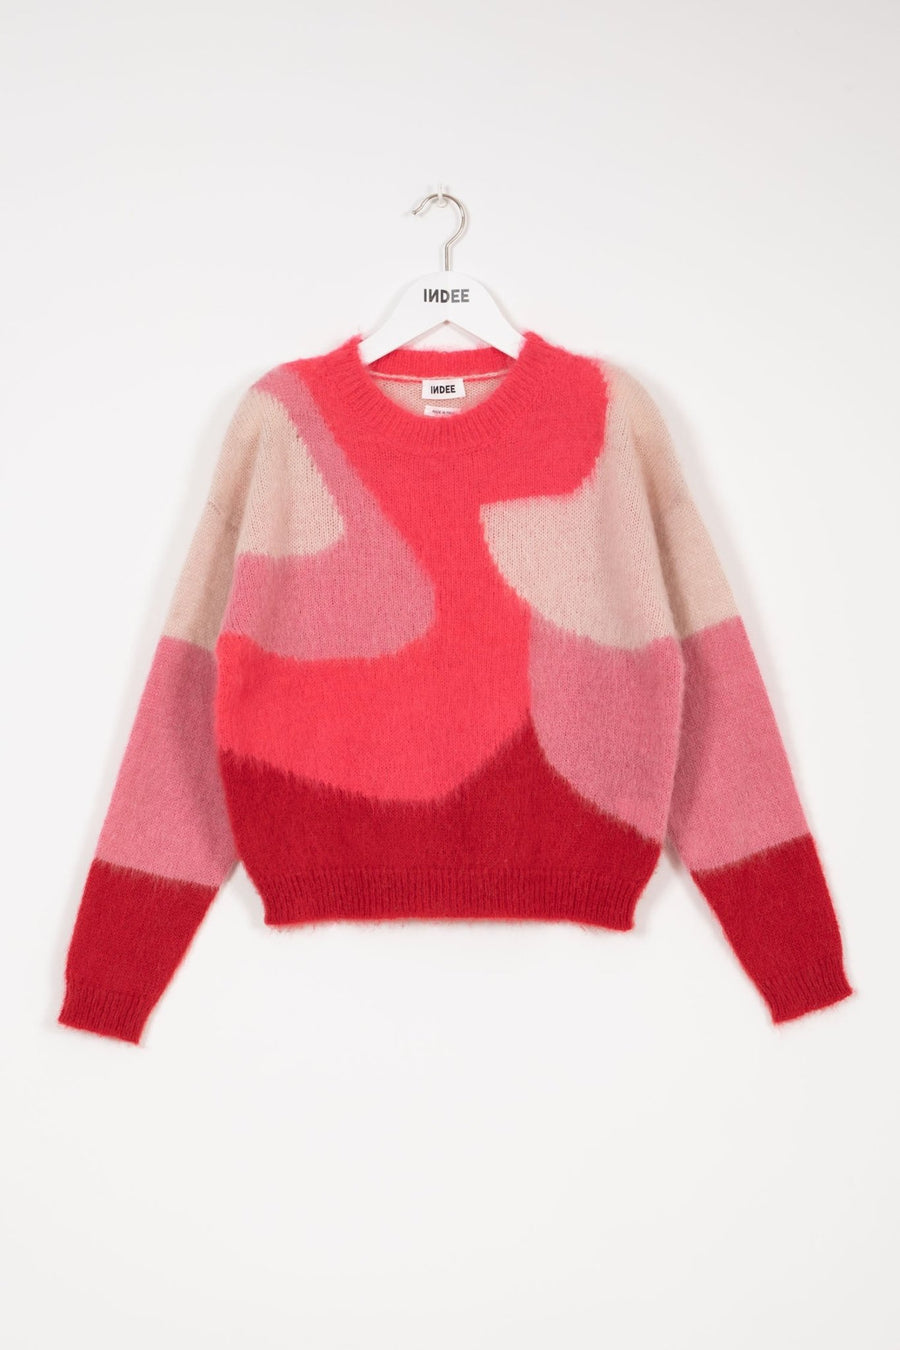 Graphic Mohair Knit Sweater - Rubis Red - Posh New York